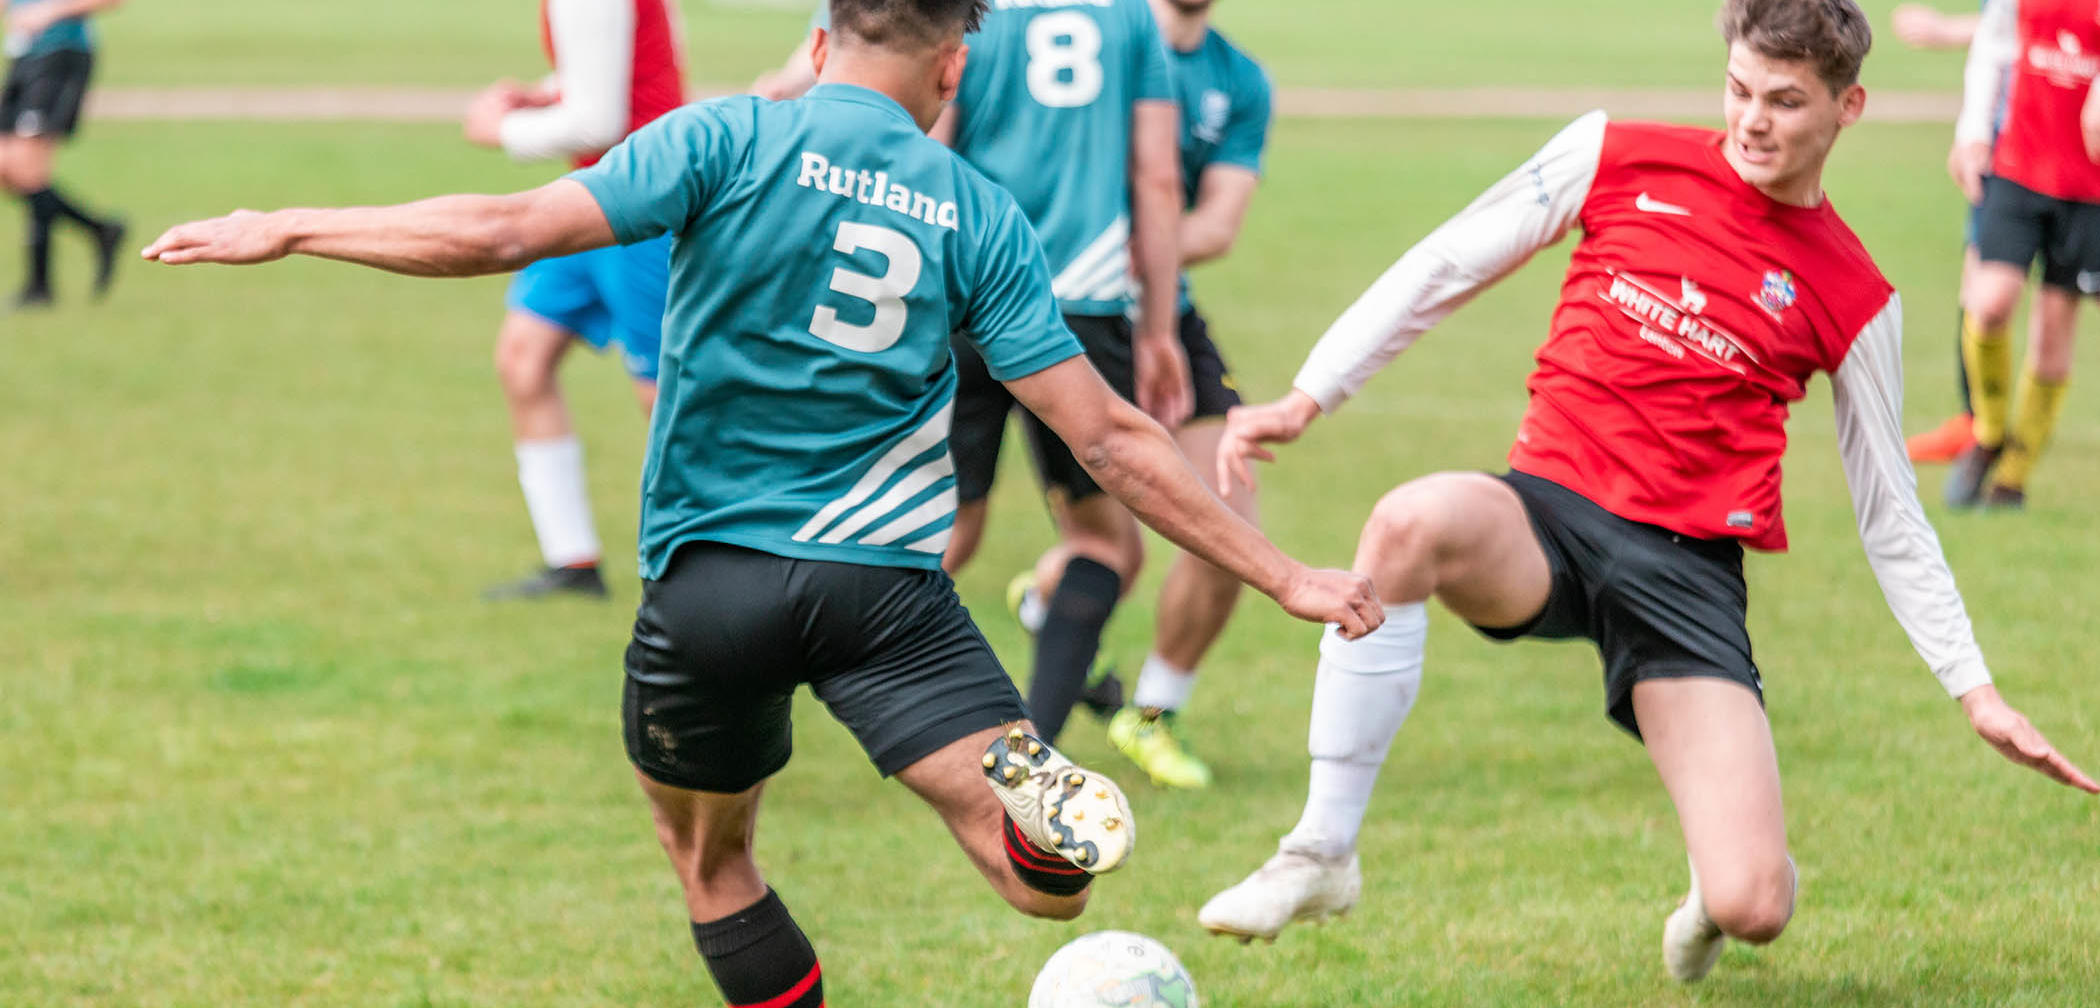 An IMS football match taking place at the University of Nottingham